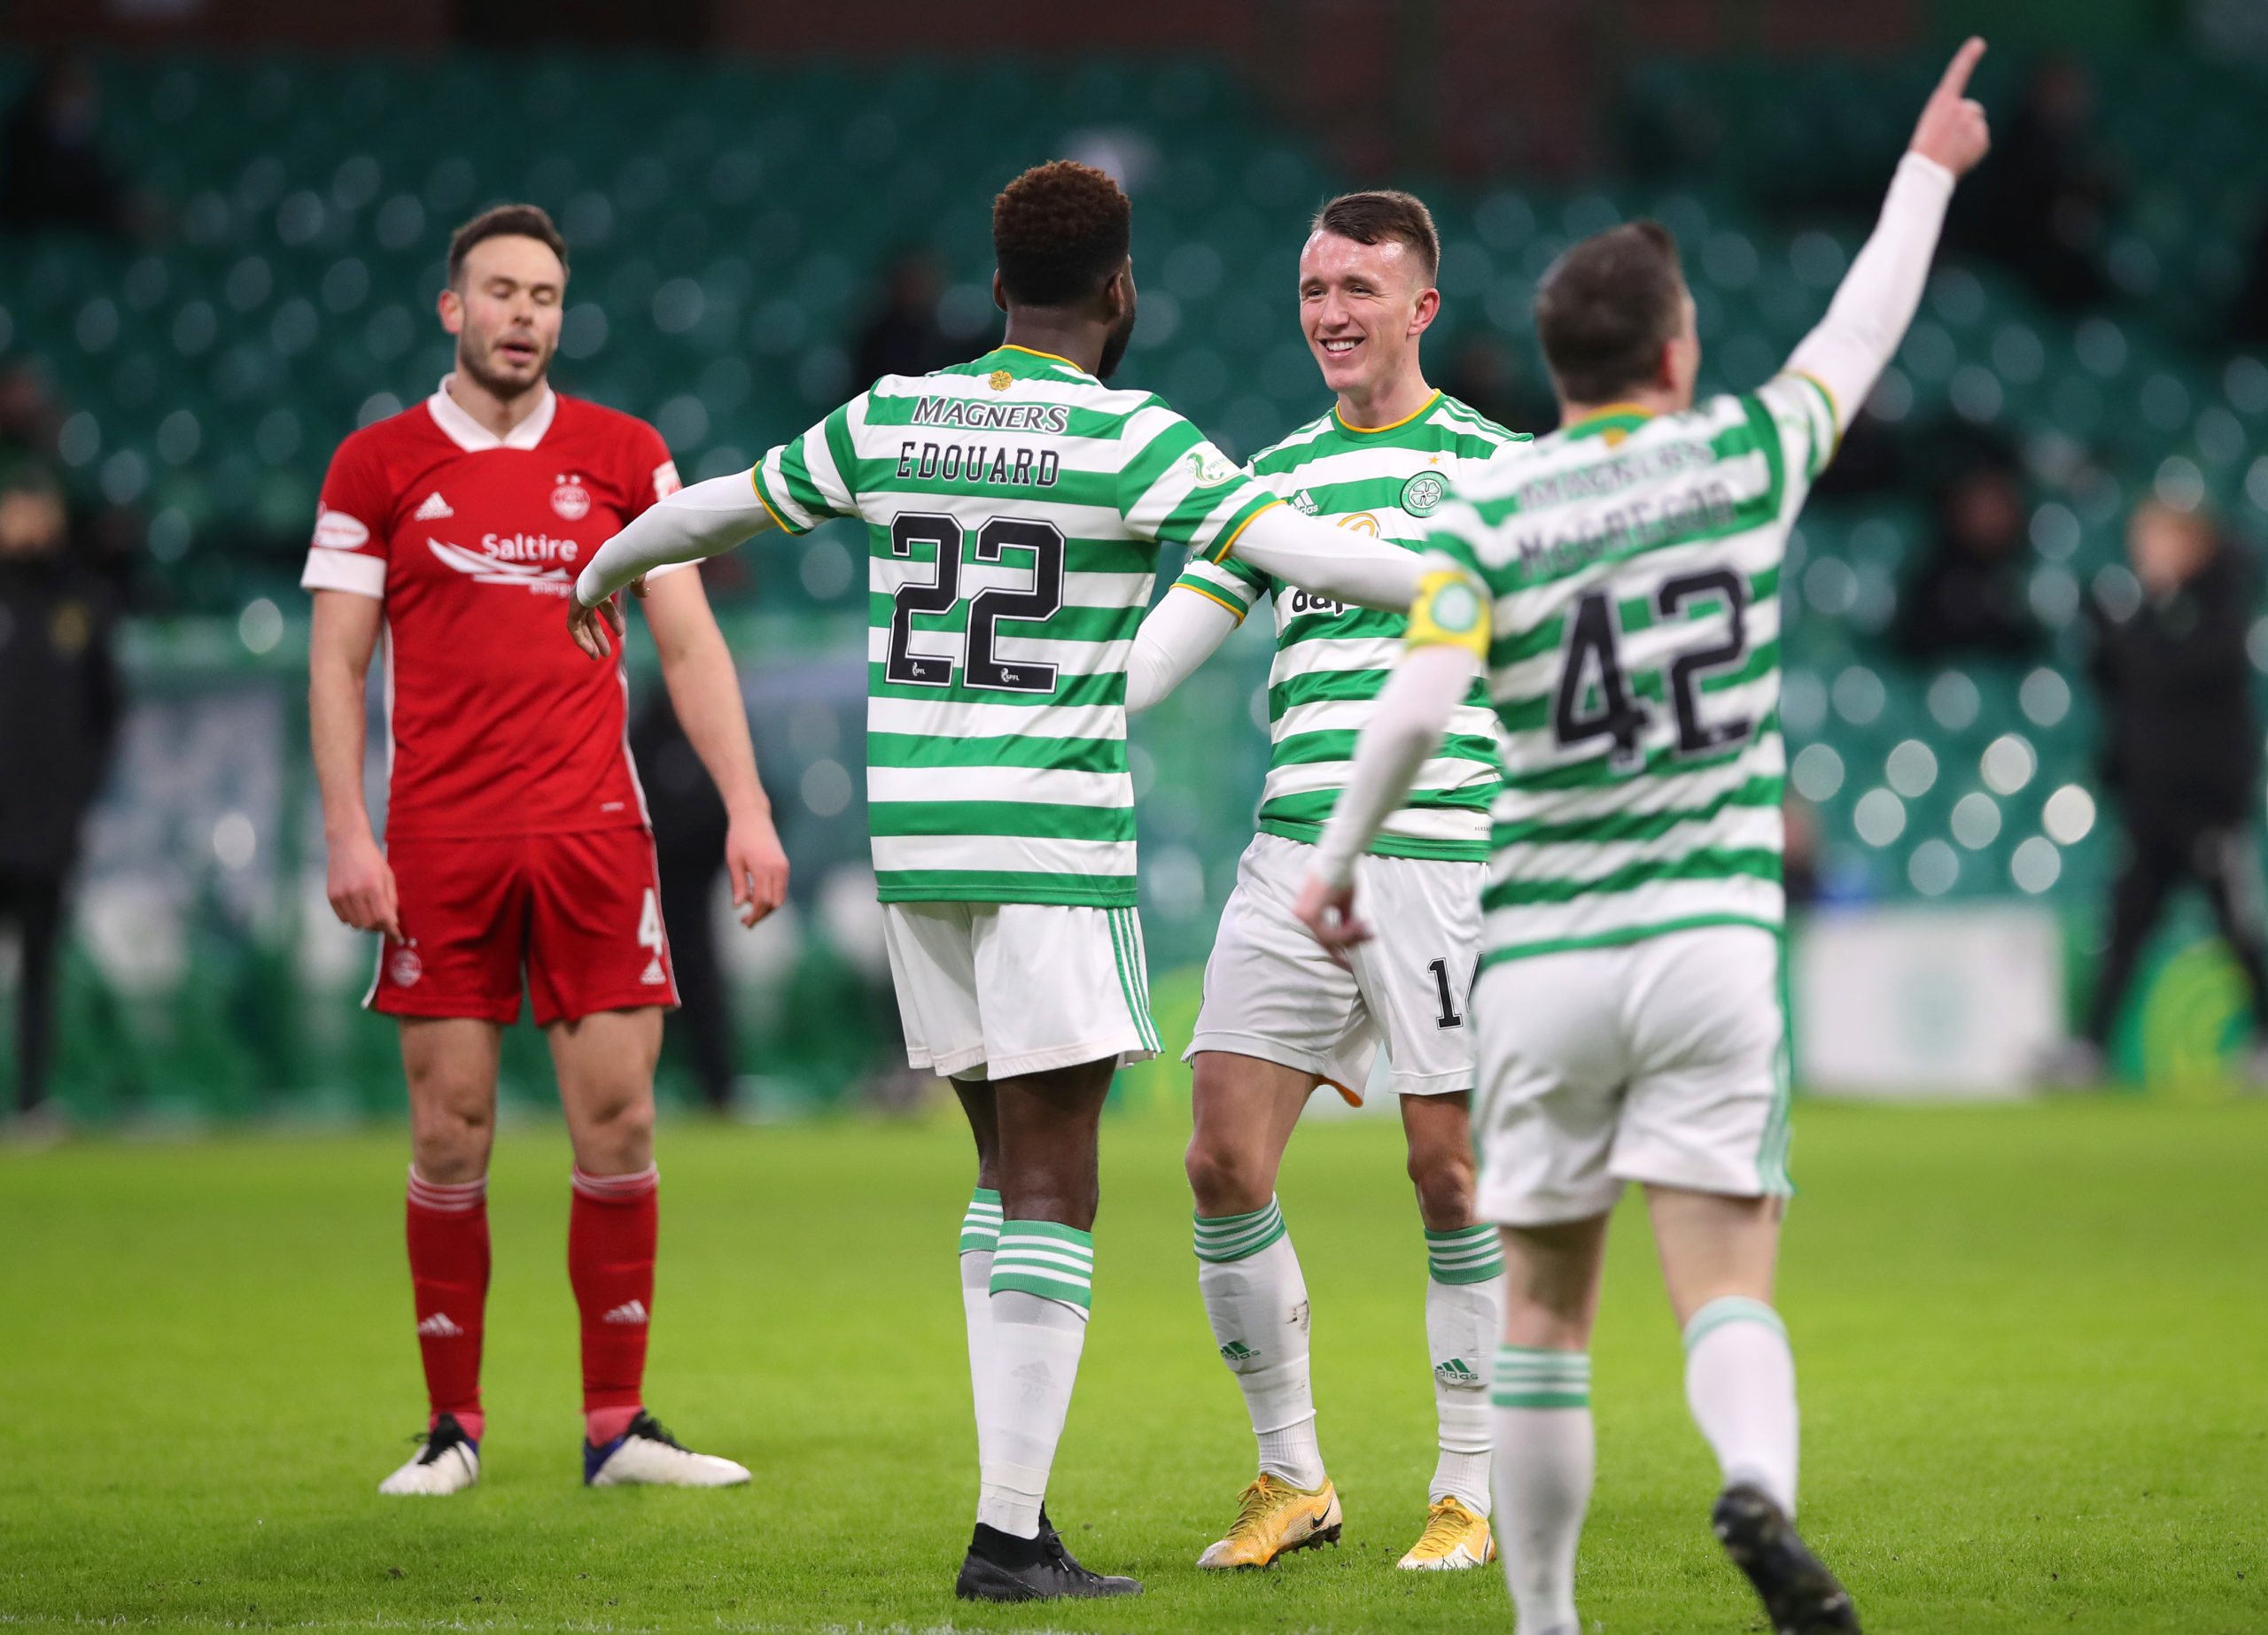 Height issues, underrated stalwart: 3 things we learned as Celtic beat Aberdeen